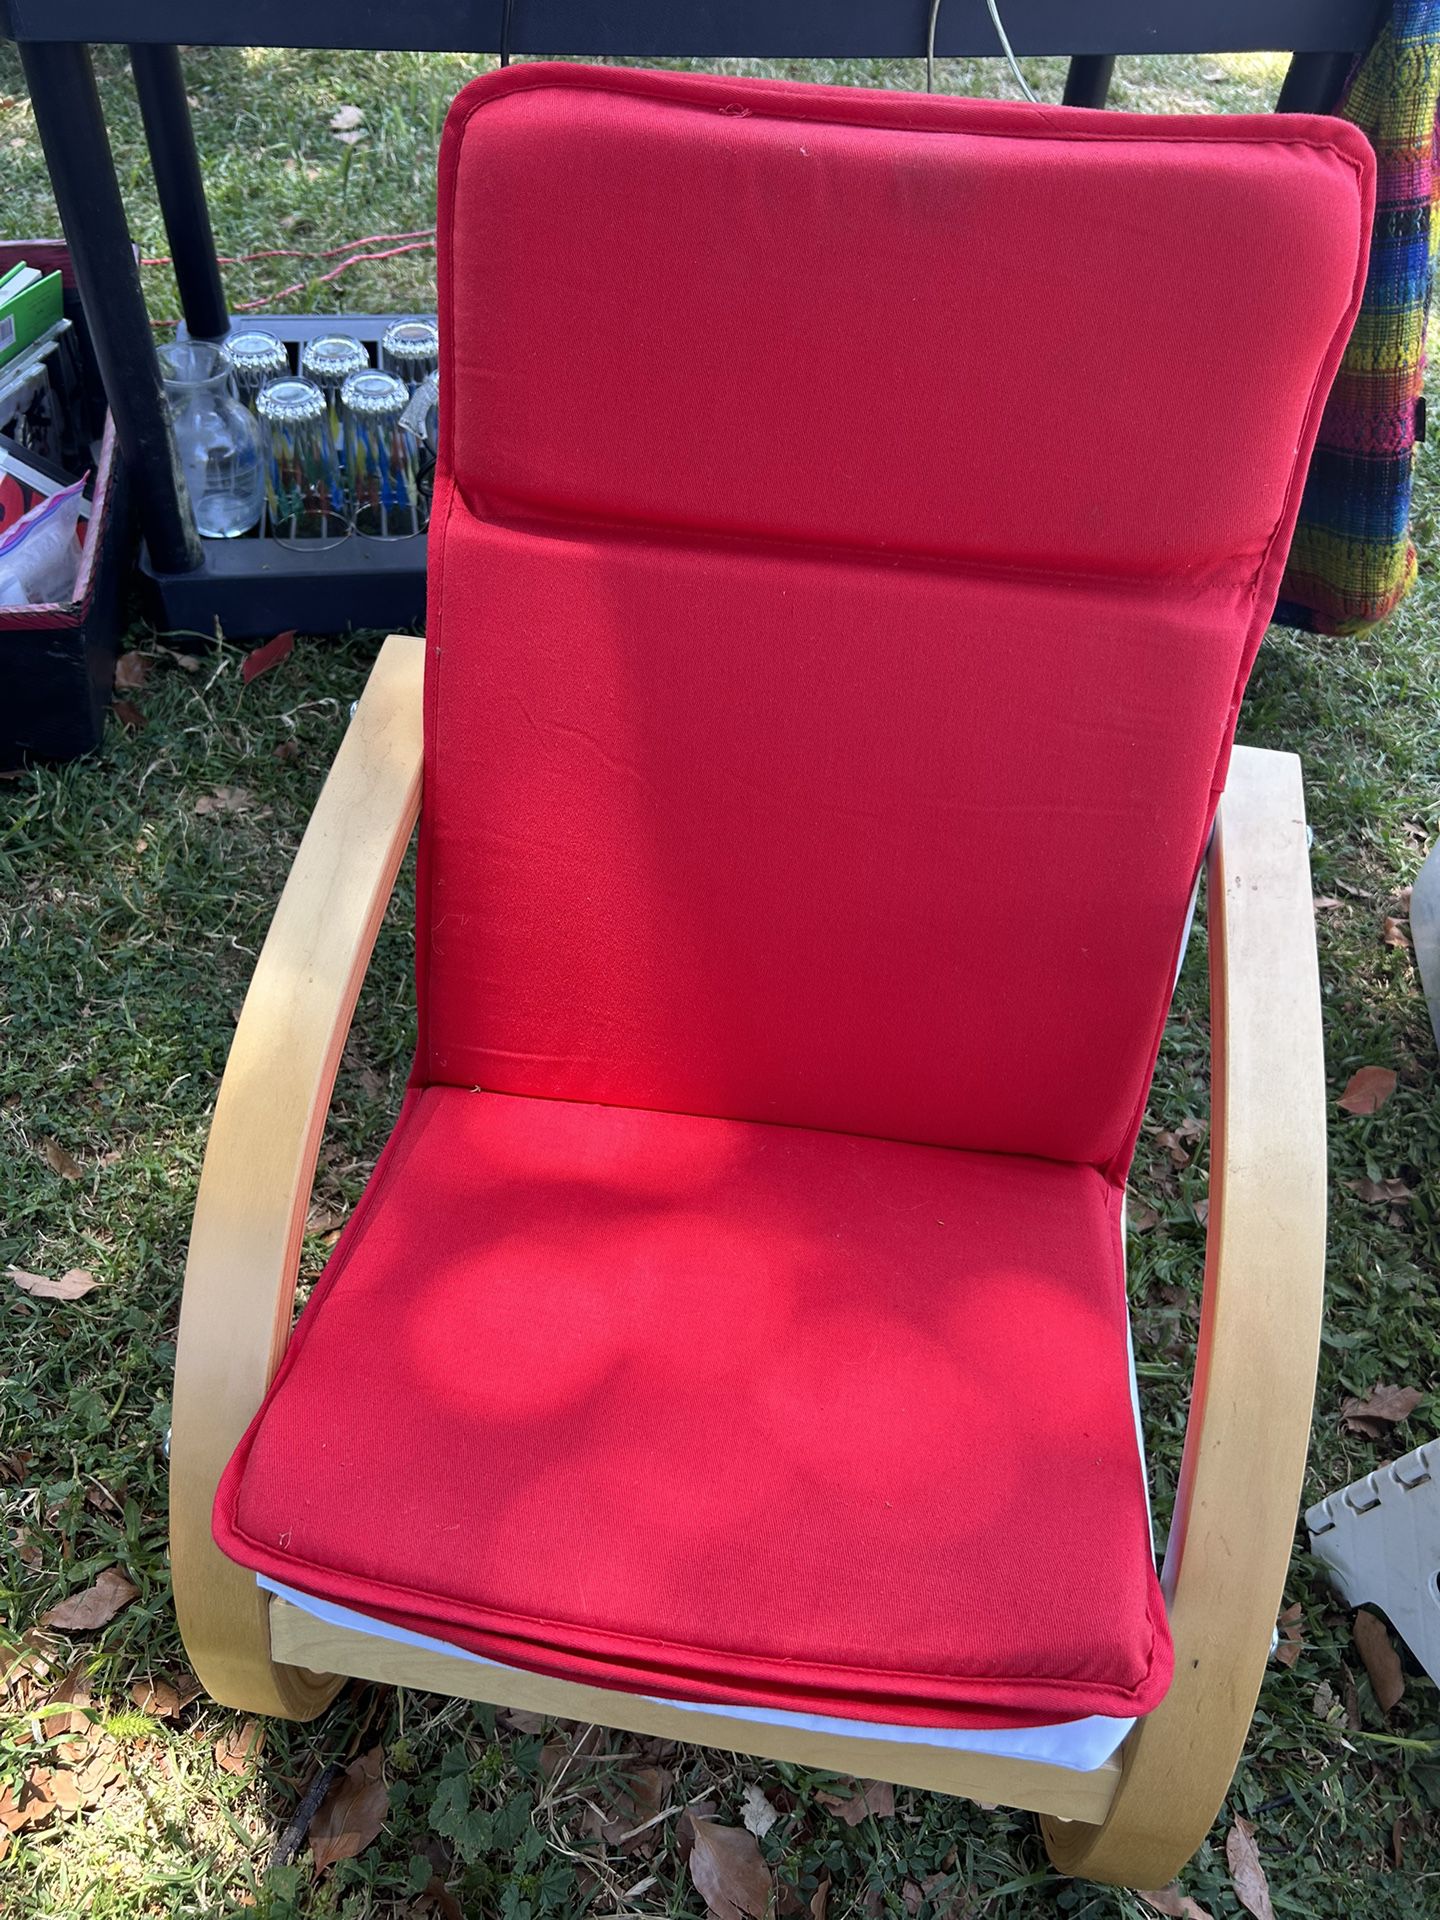 Used Chair $30